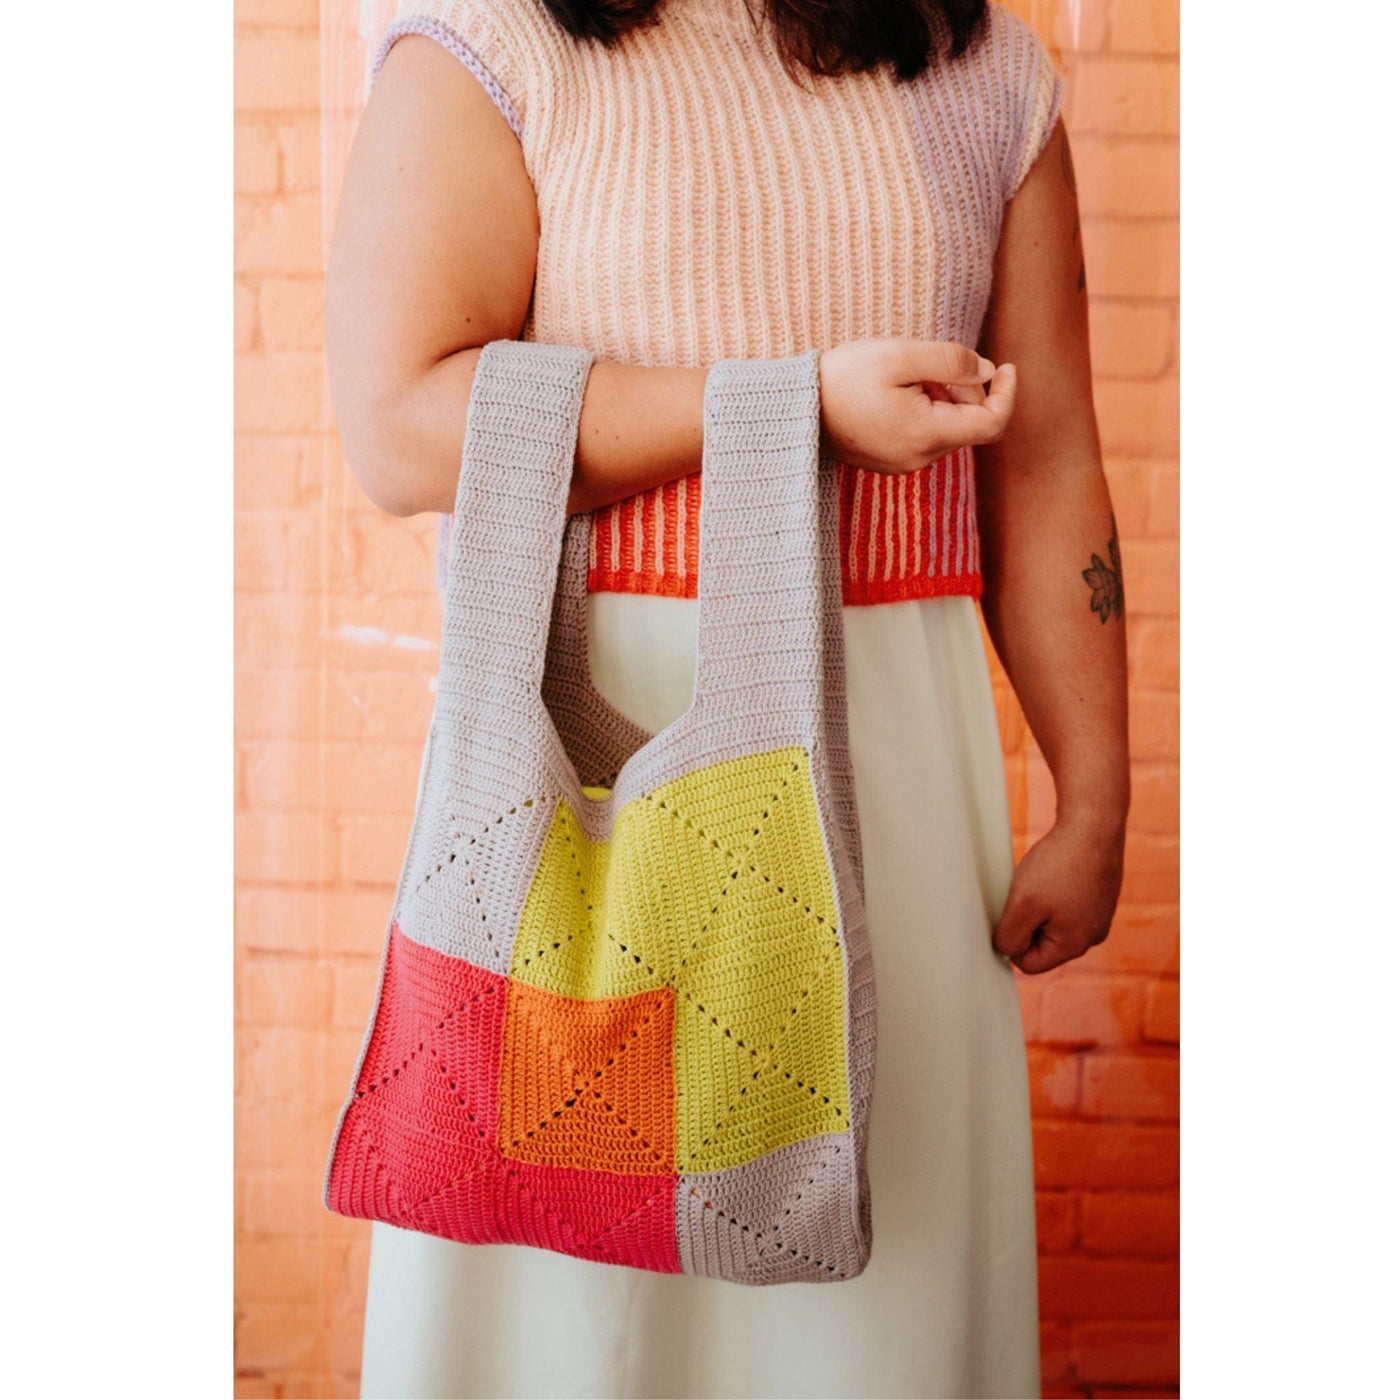 A woman in a short sleeve knit sweater stands holding a colorful crochet handbag. 